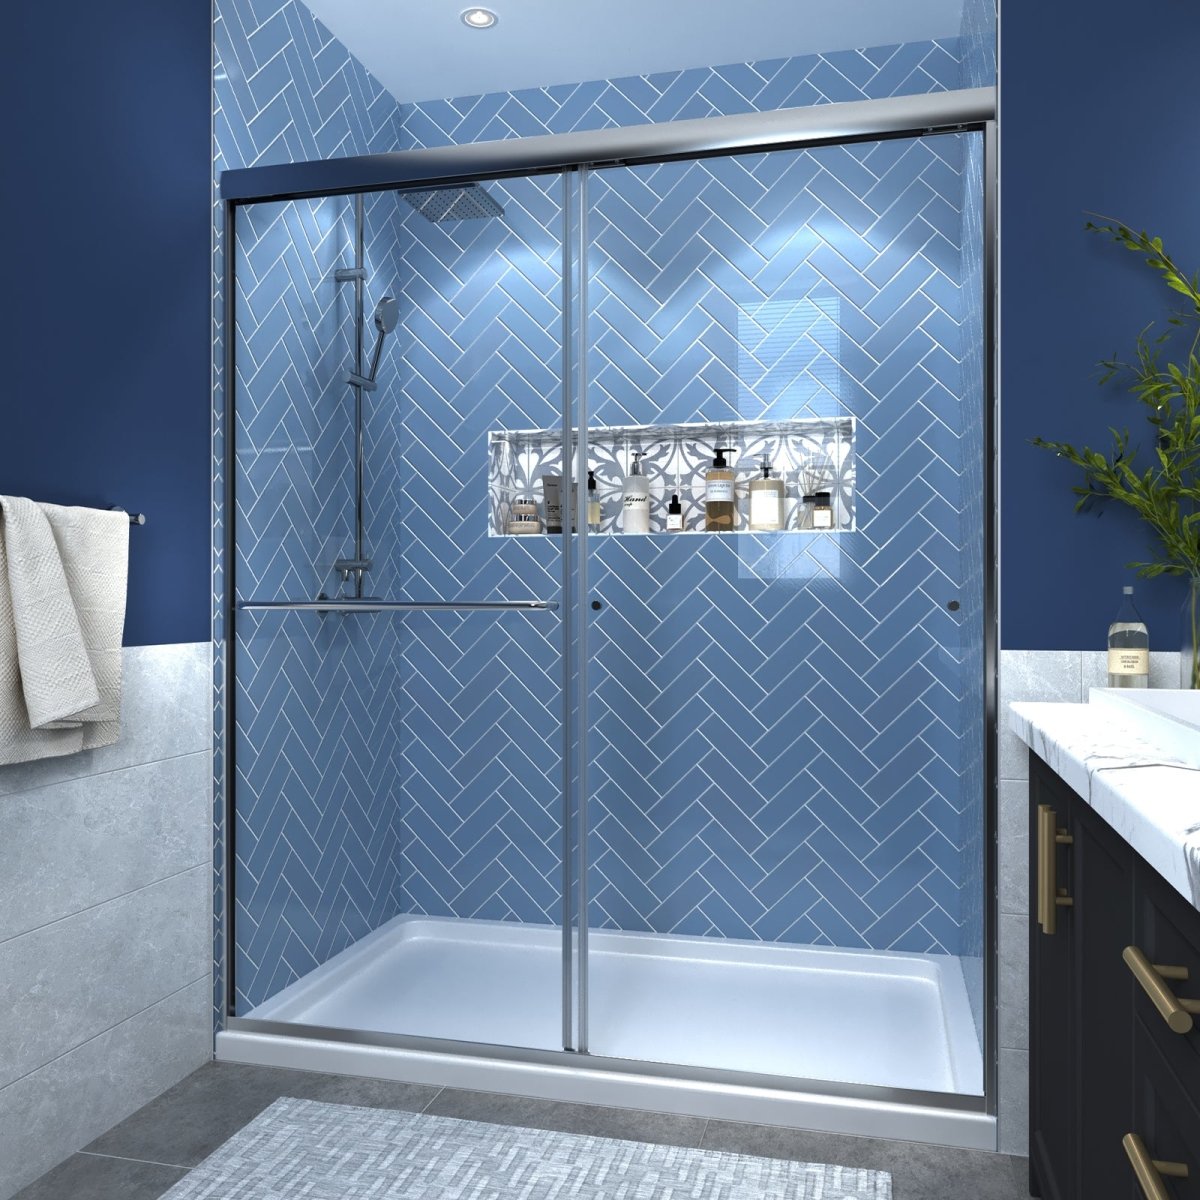 ExBrite 60 in. W x 70 in. H Sliding Framed Shower Door in Chrome Finish with Clear Glass - ExBriteUSA